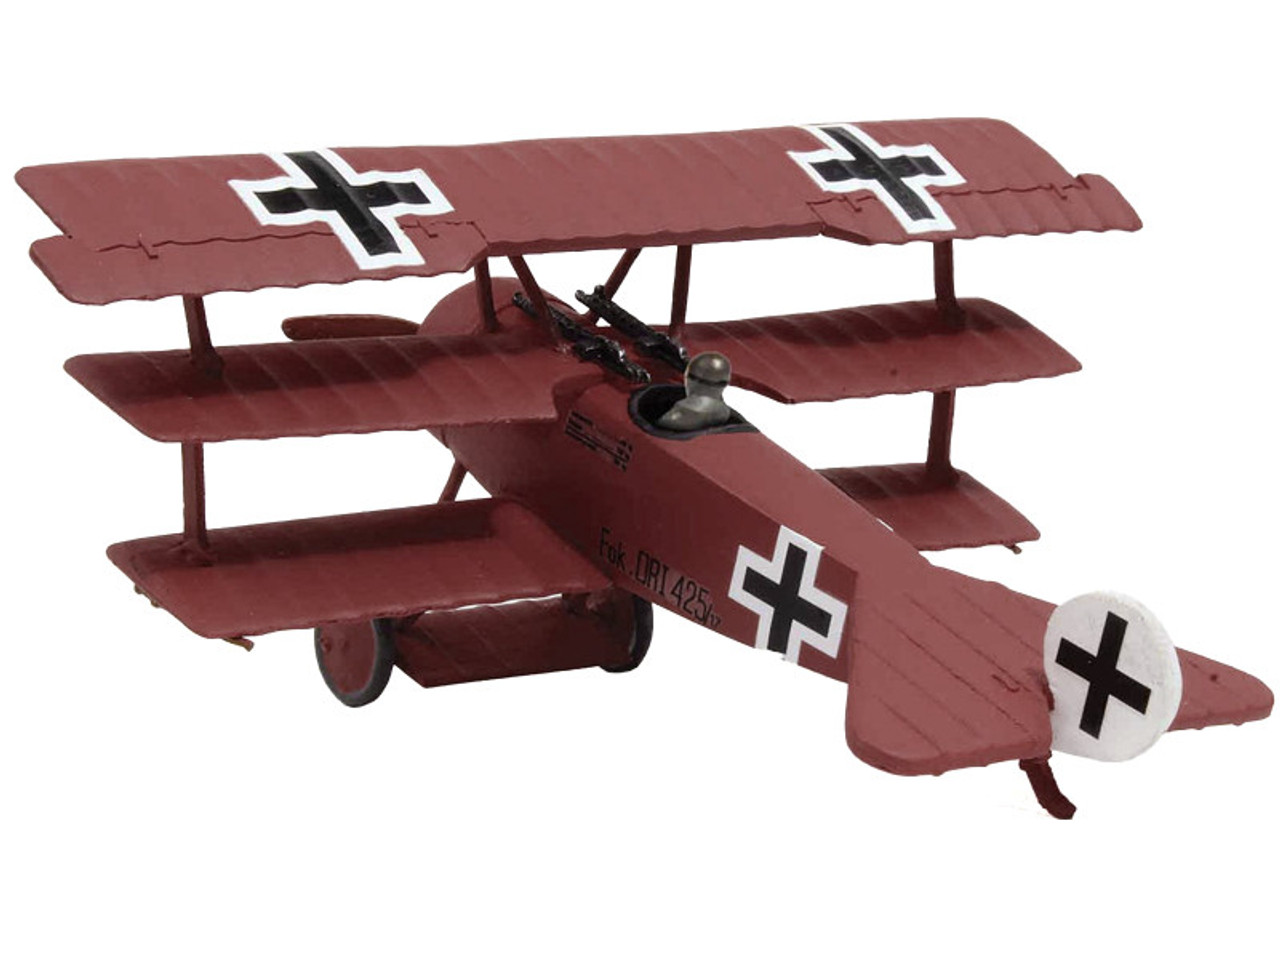 Fokker Dr.I Fighter Aircraft "Red Baron World War I" German Air Combat Forces 1/72 Model Airplane by Wings of the Great War